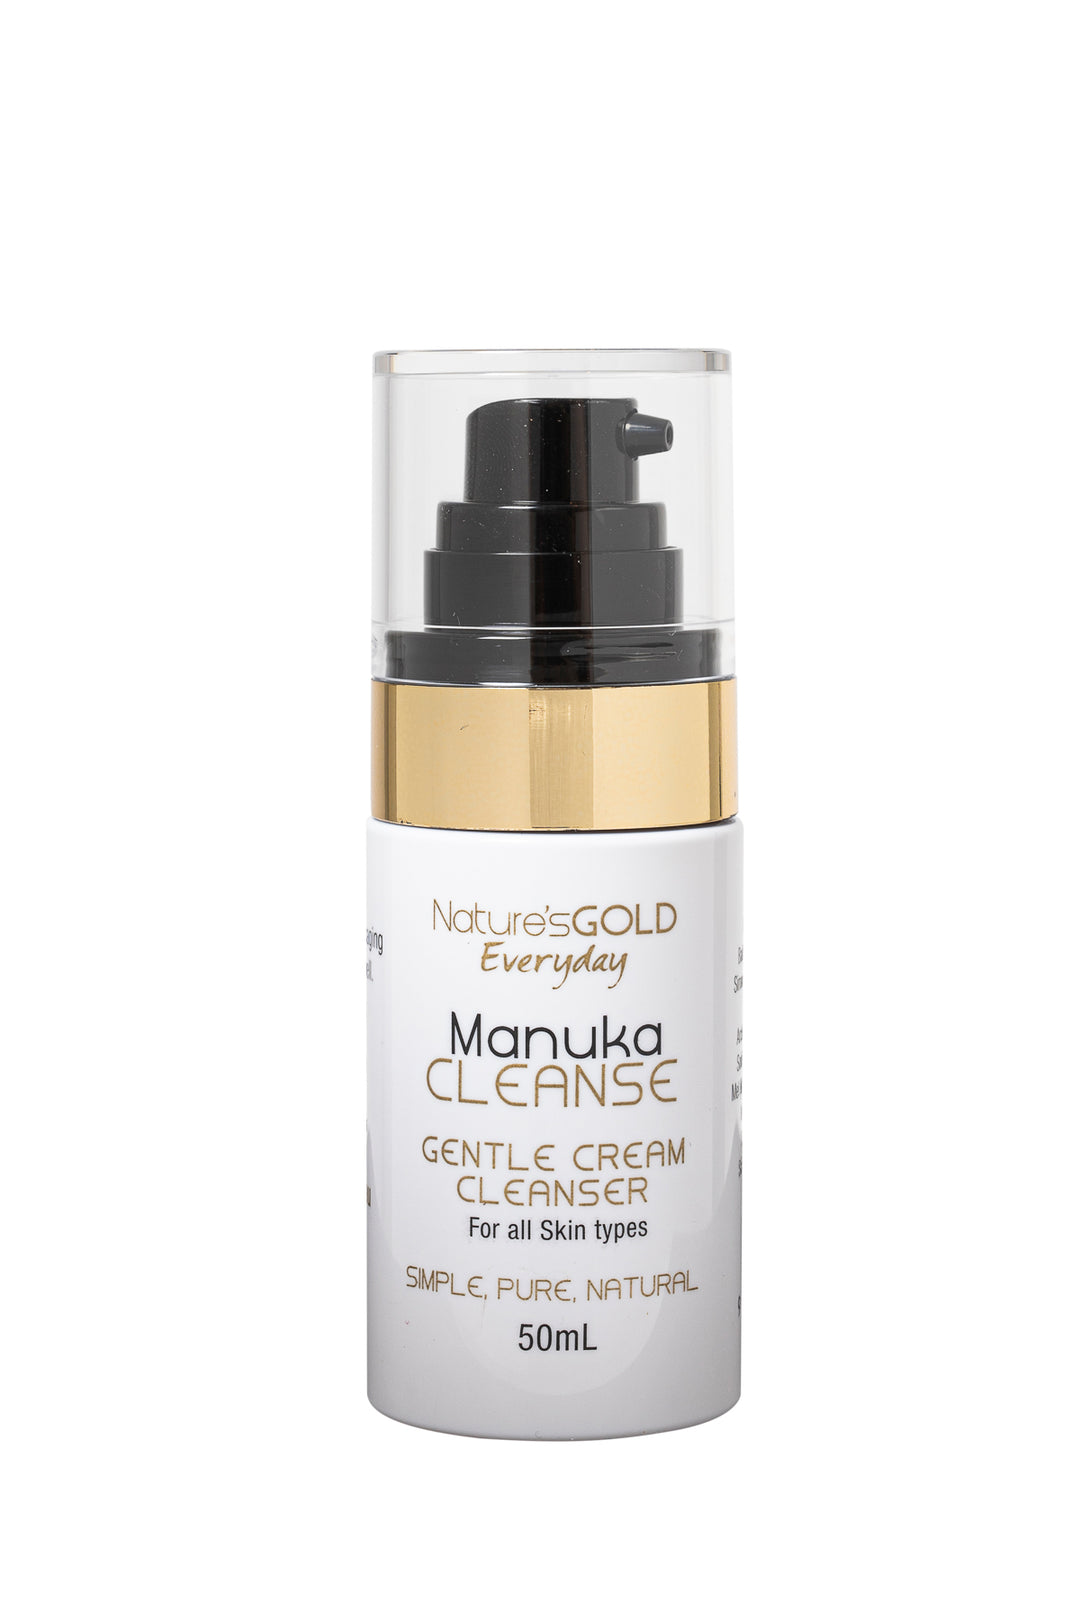 Manuka Cleanse gentle cream cleanser 50ml - front 